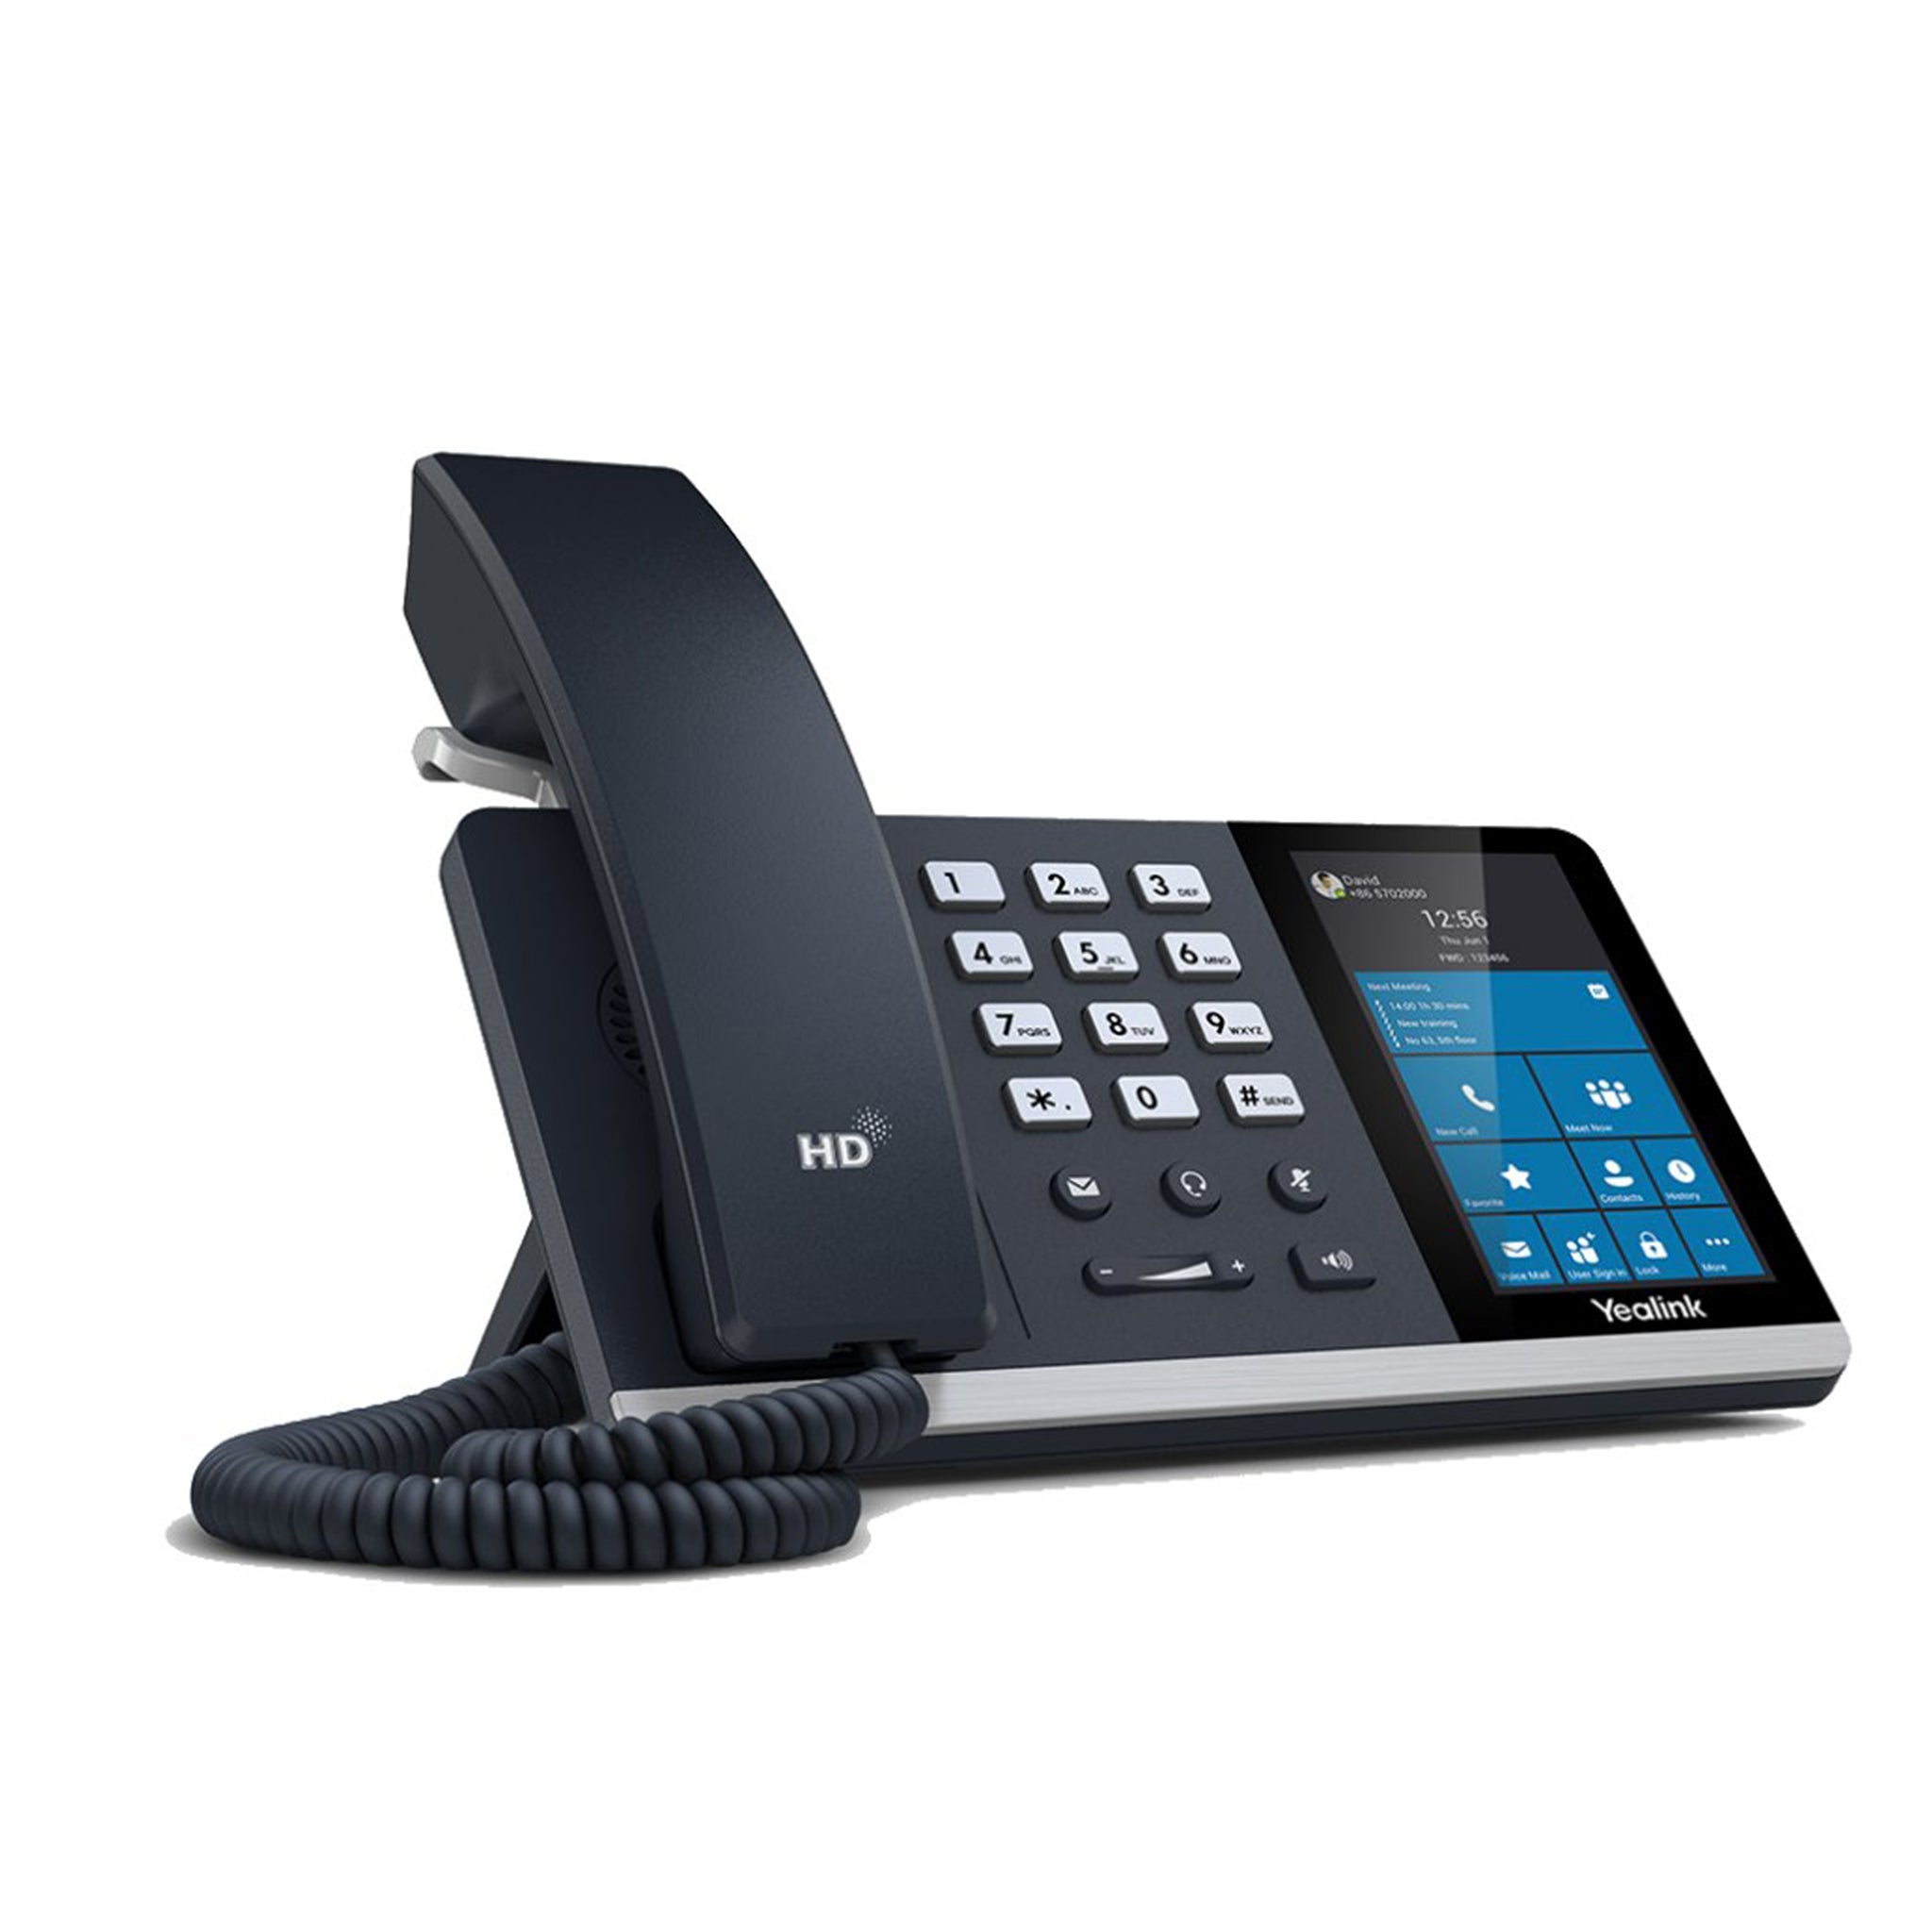 Yealink VoIP Phone T55A-Teams Edition